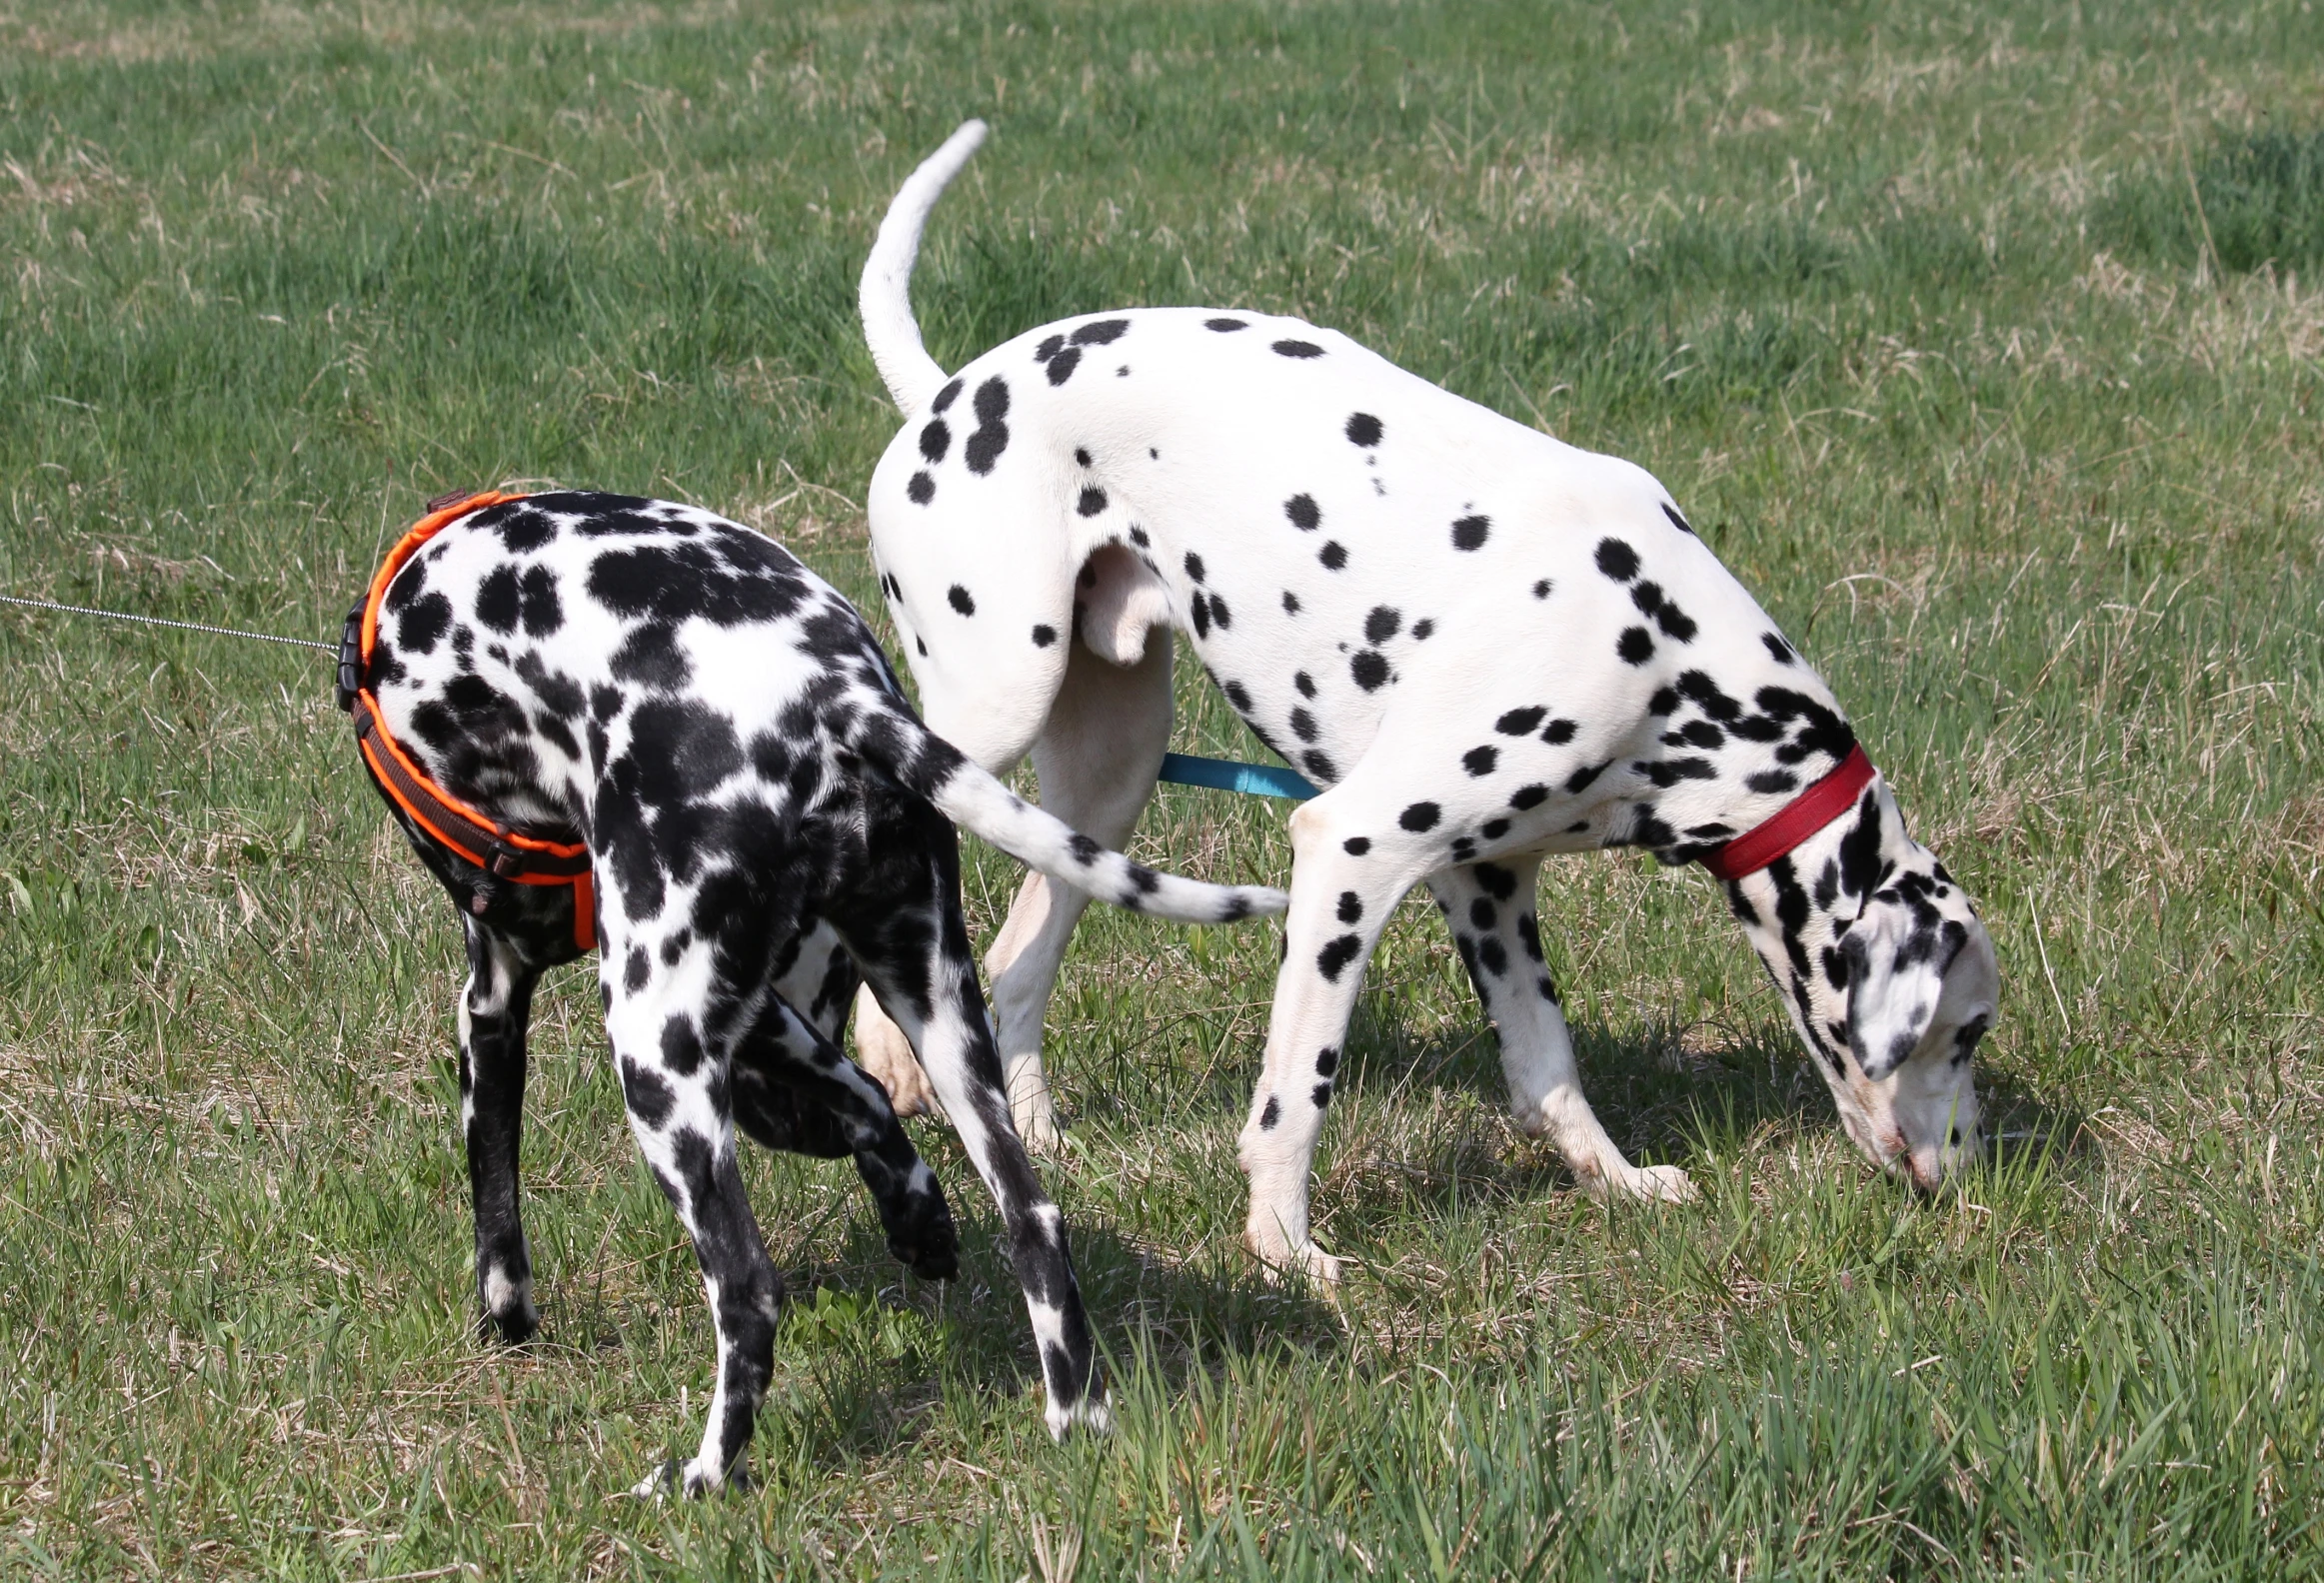 two dalmatian dogs play fighting in the grass